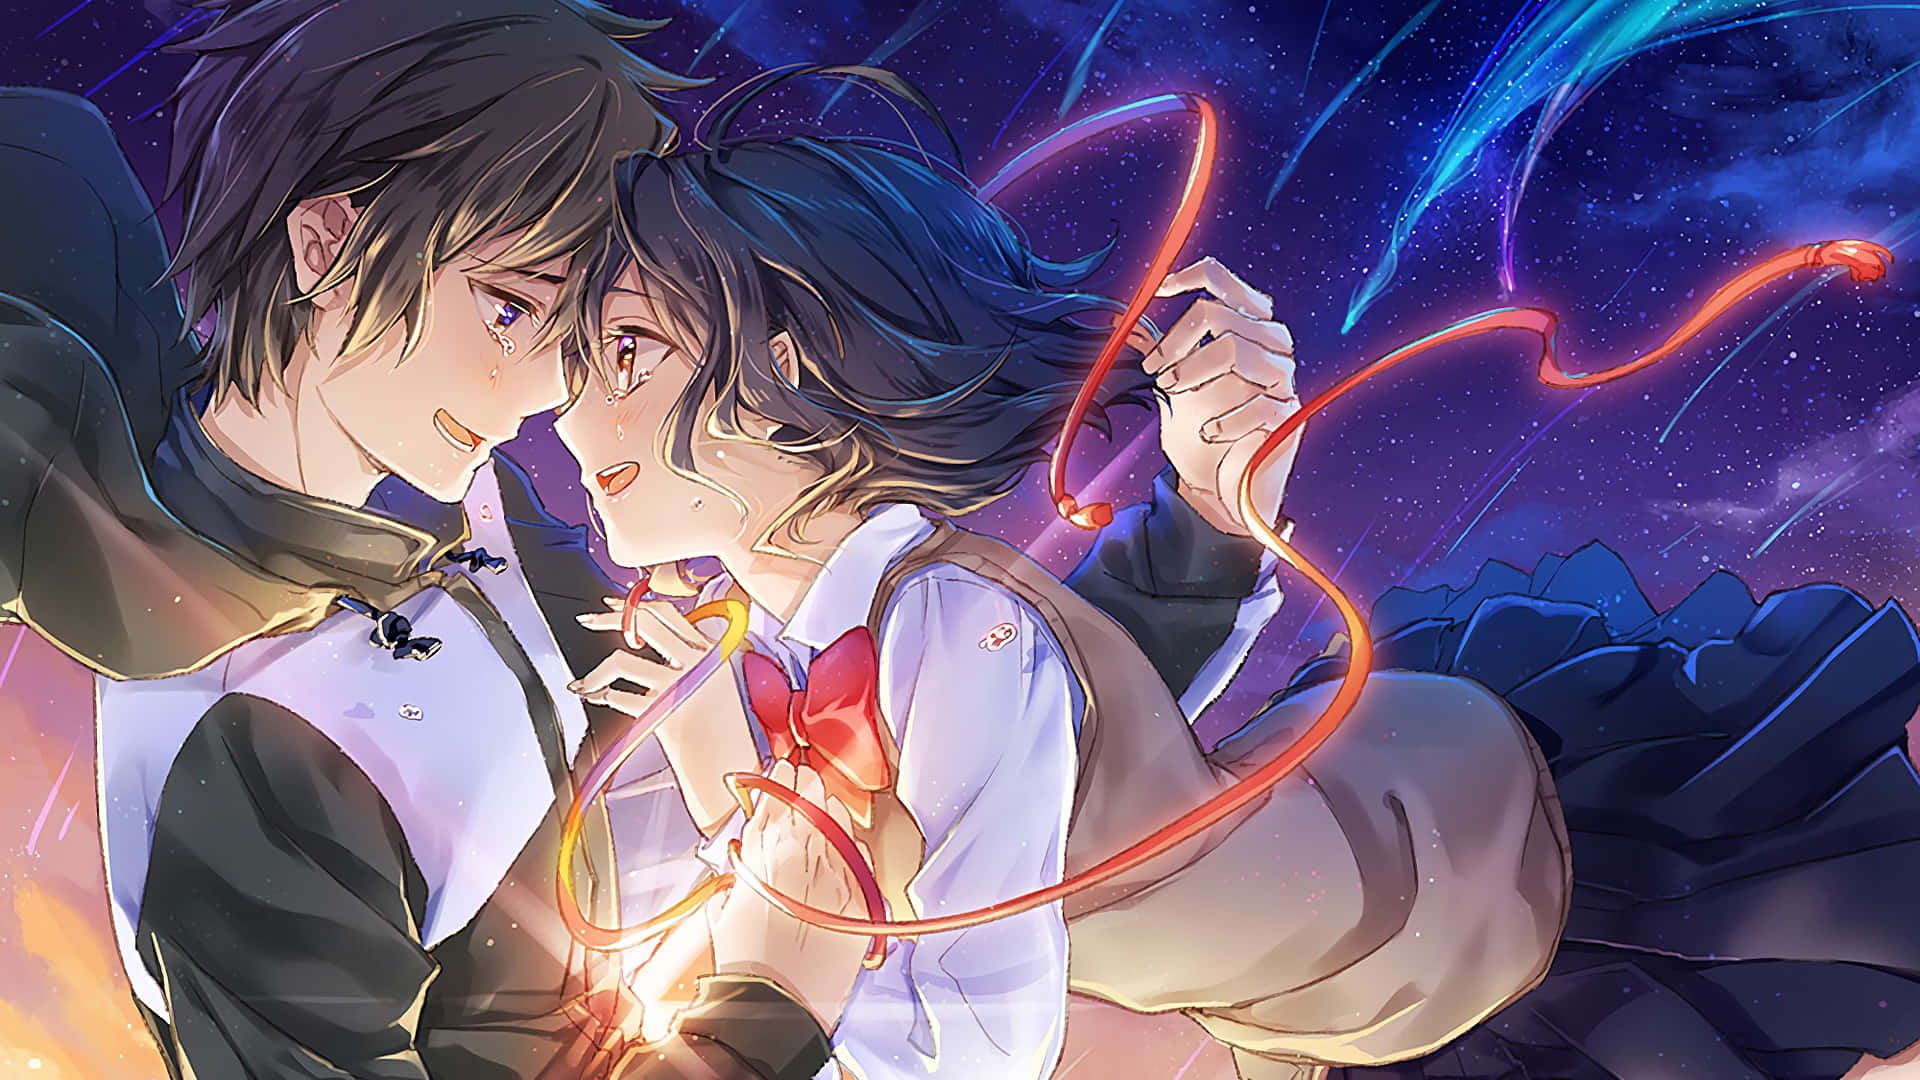 Download Two contrasting yet connected characters in Kimi No Na Wa